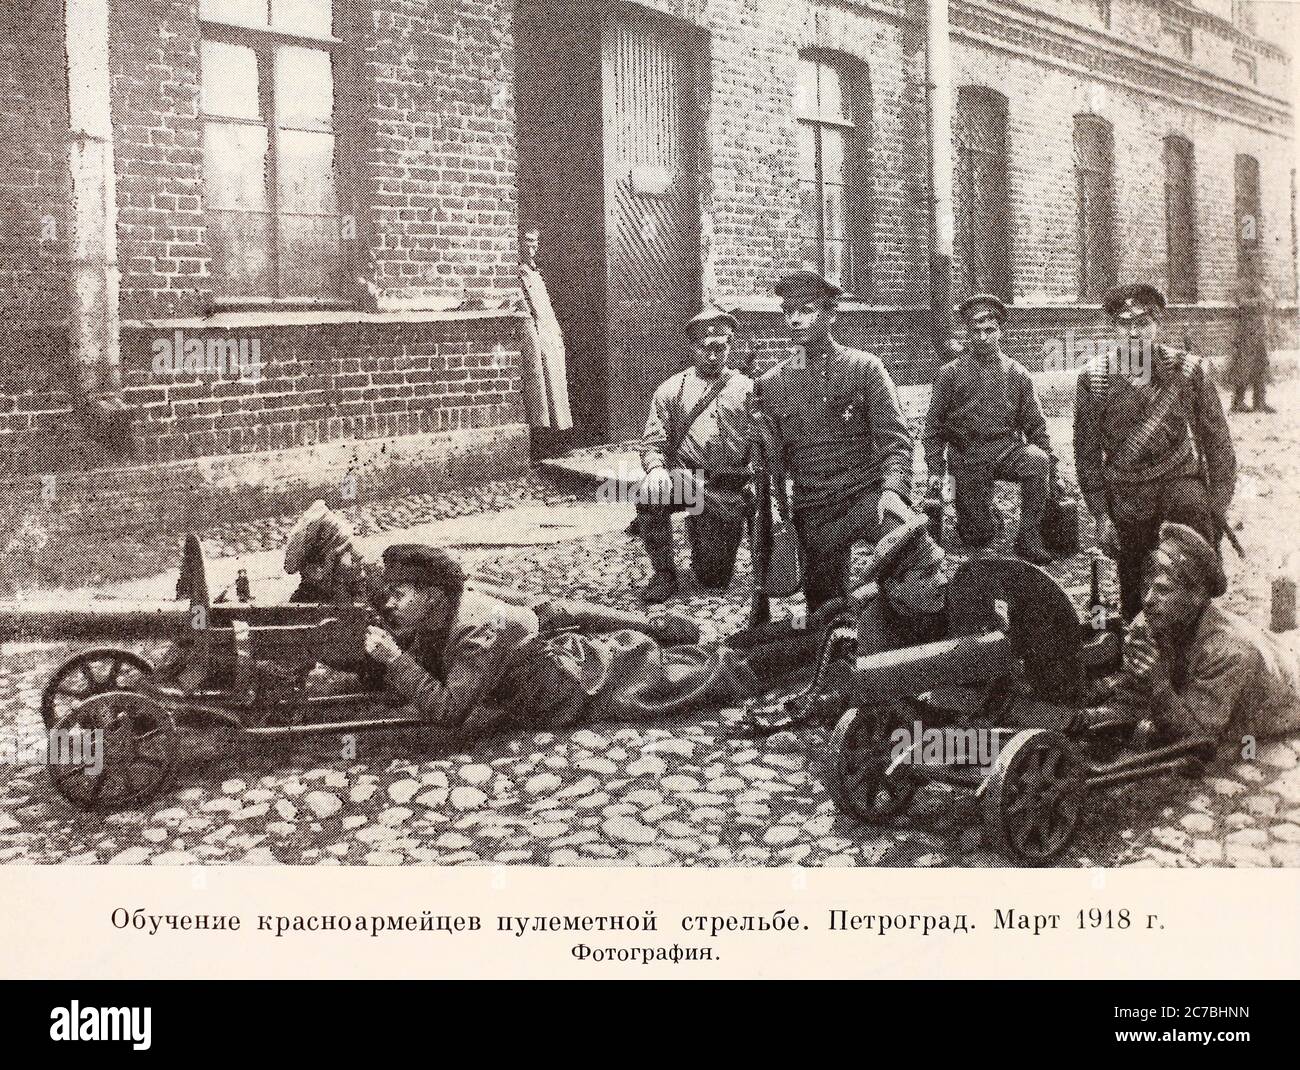 Training of the Red Army in machine gun shooting. Petrograd, March 1918. Stock Photo